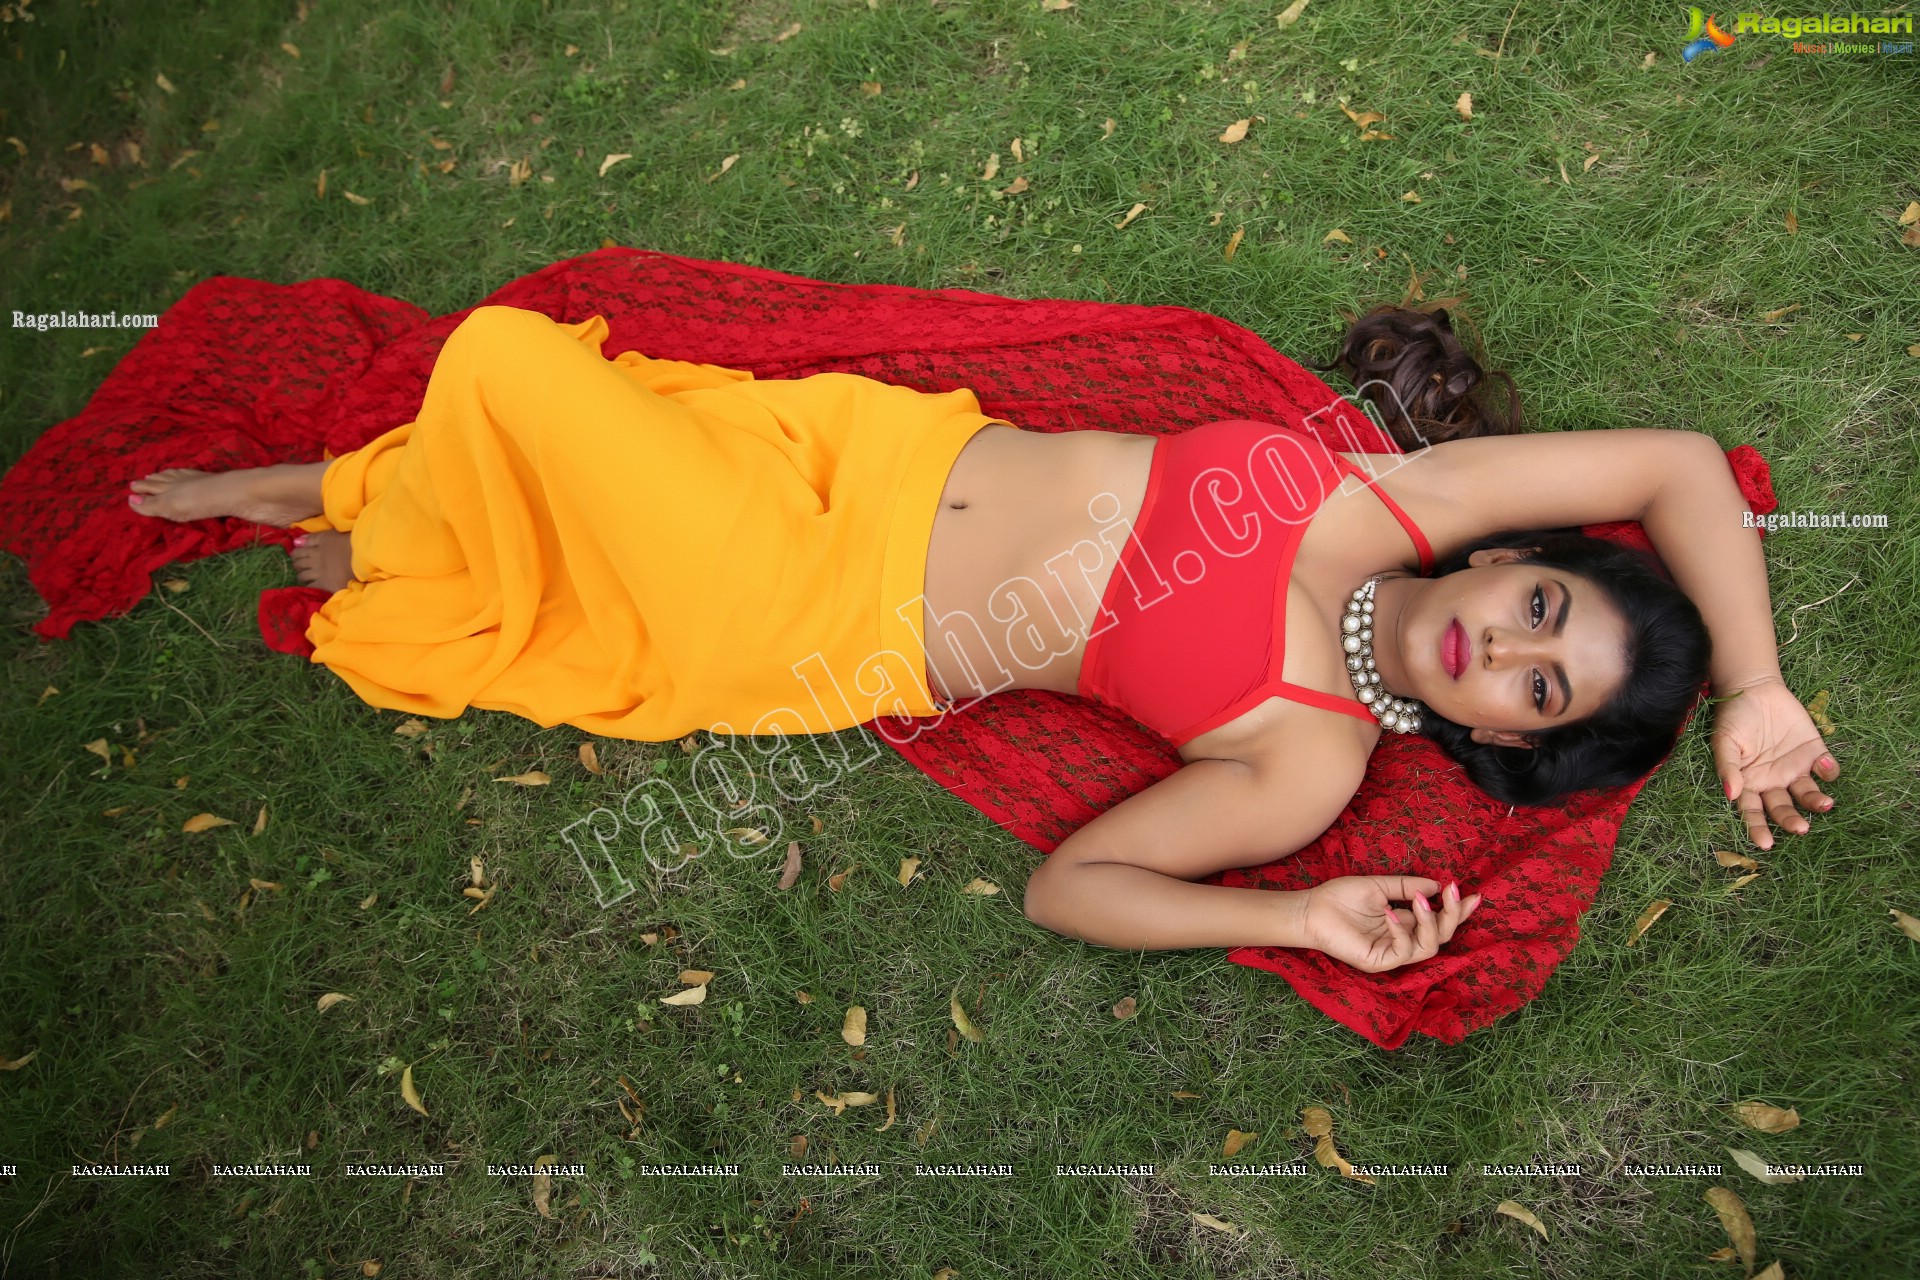 Priyanka Augustin in Yellow Divided Skirt and Red Crop Top, Exclusive Photo Shoot